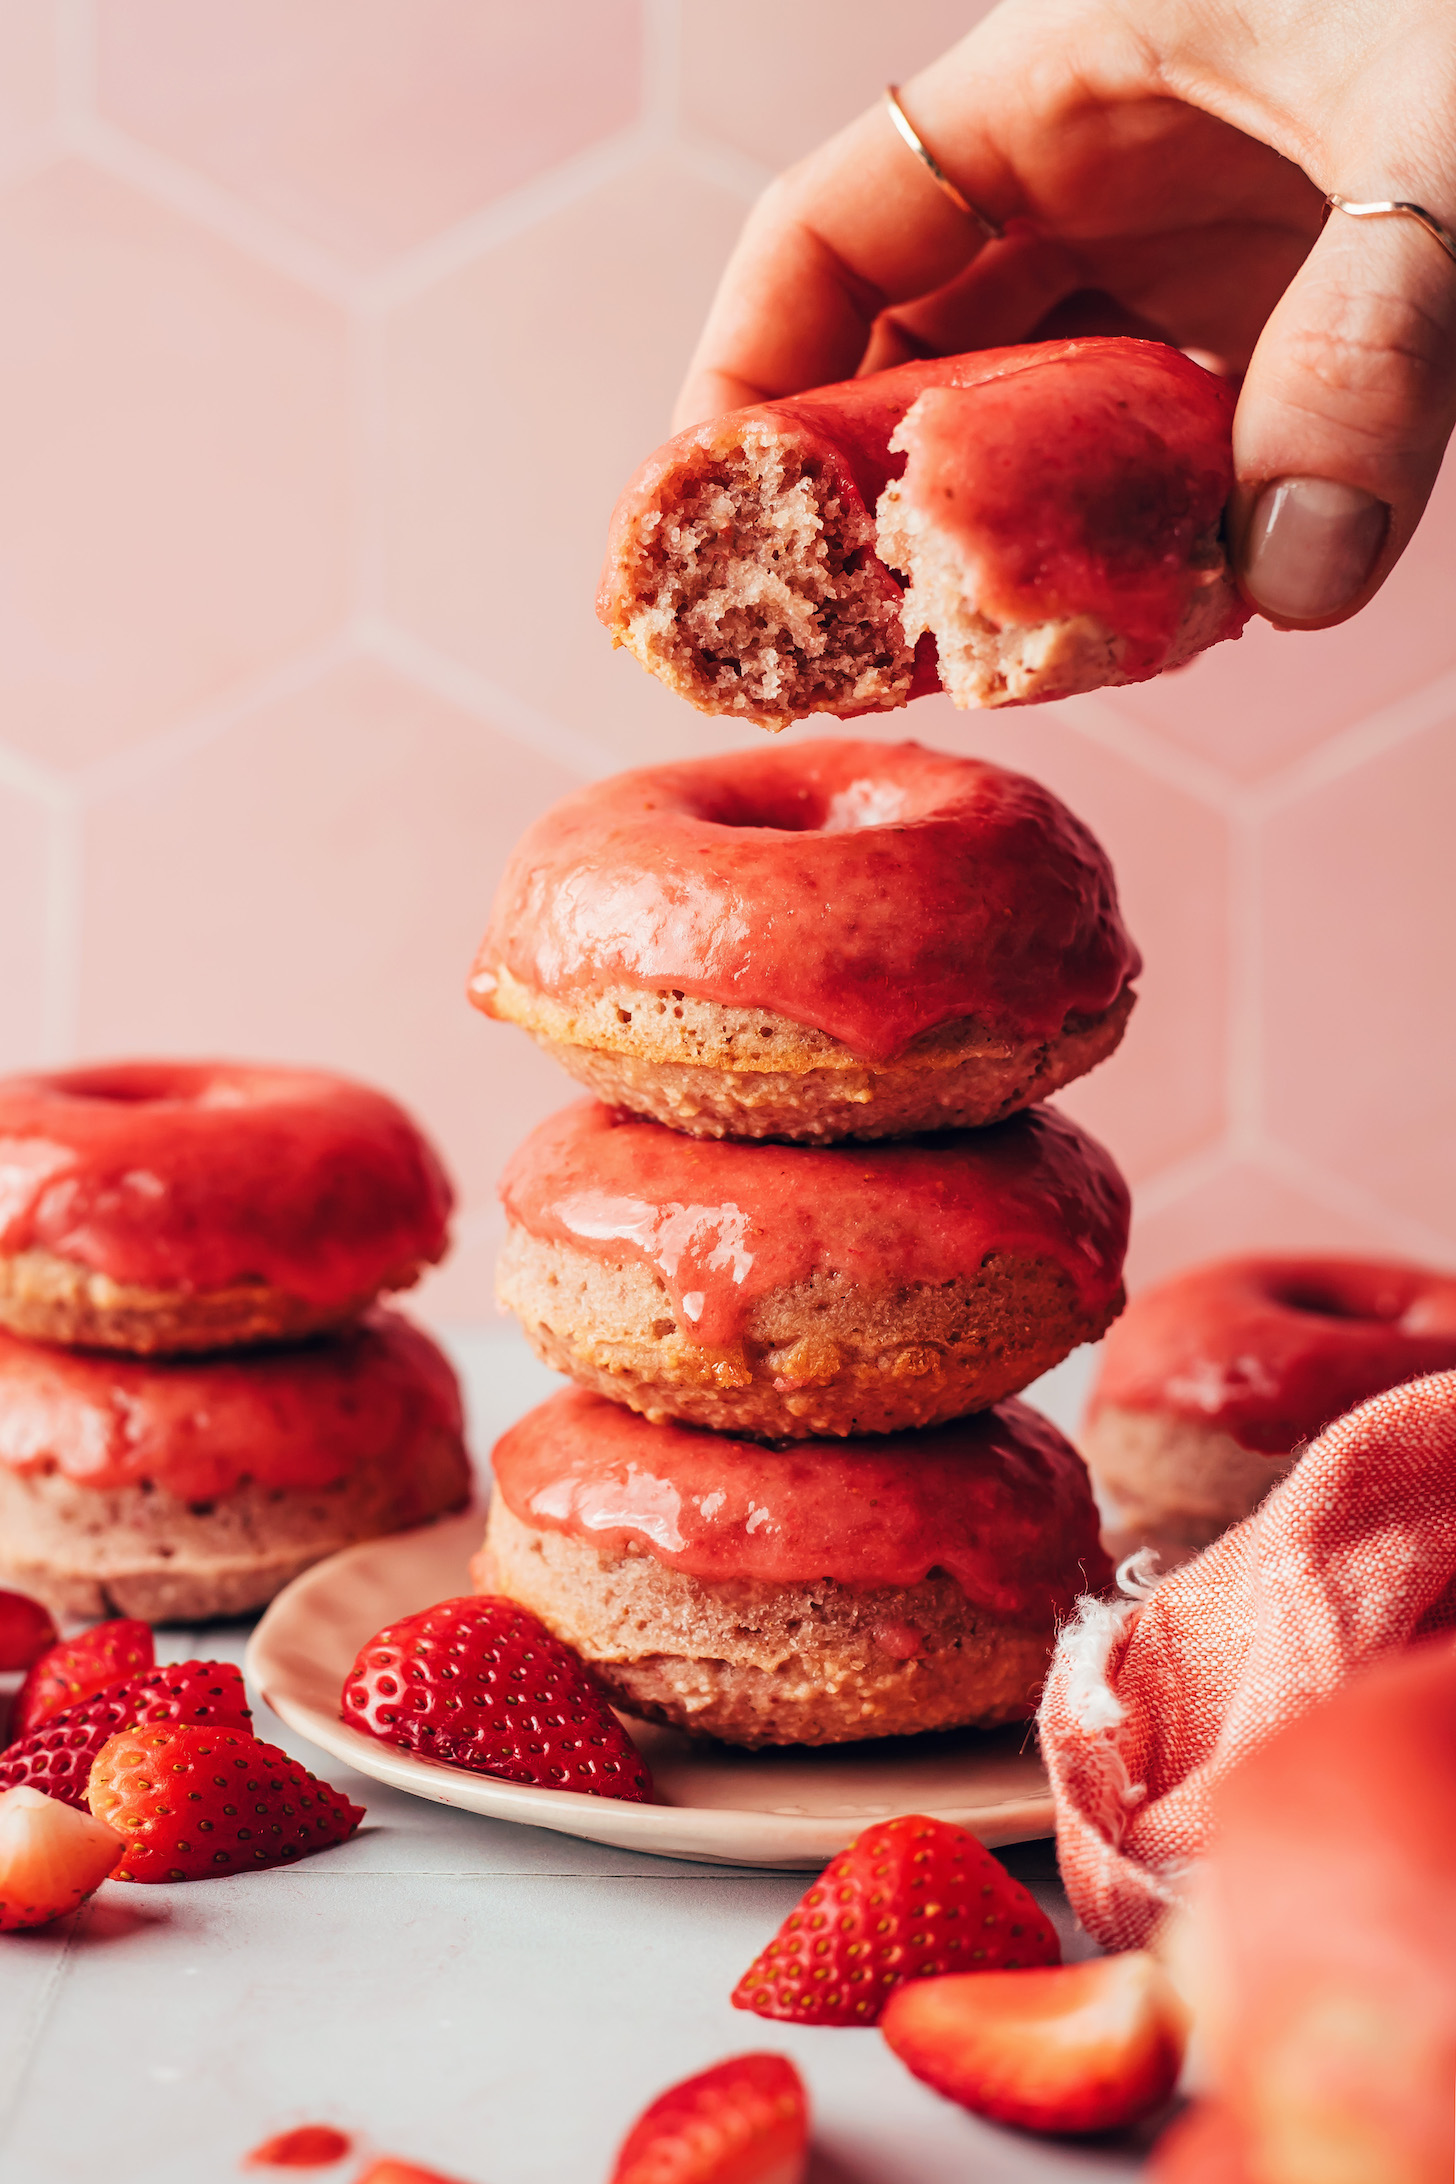 Holding a partially eaten baked vegan gluten-free strawberry donut over a stack of more donuts